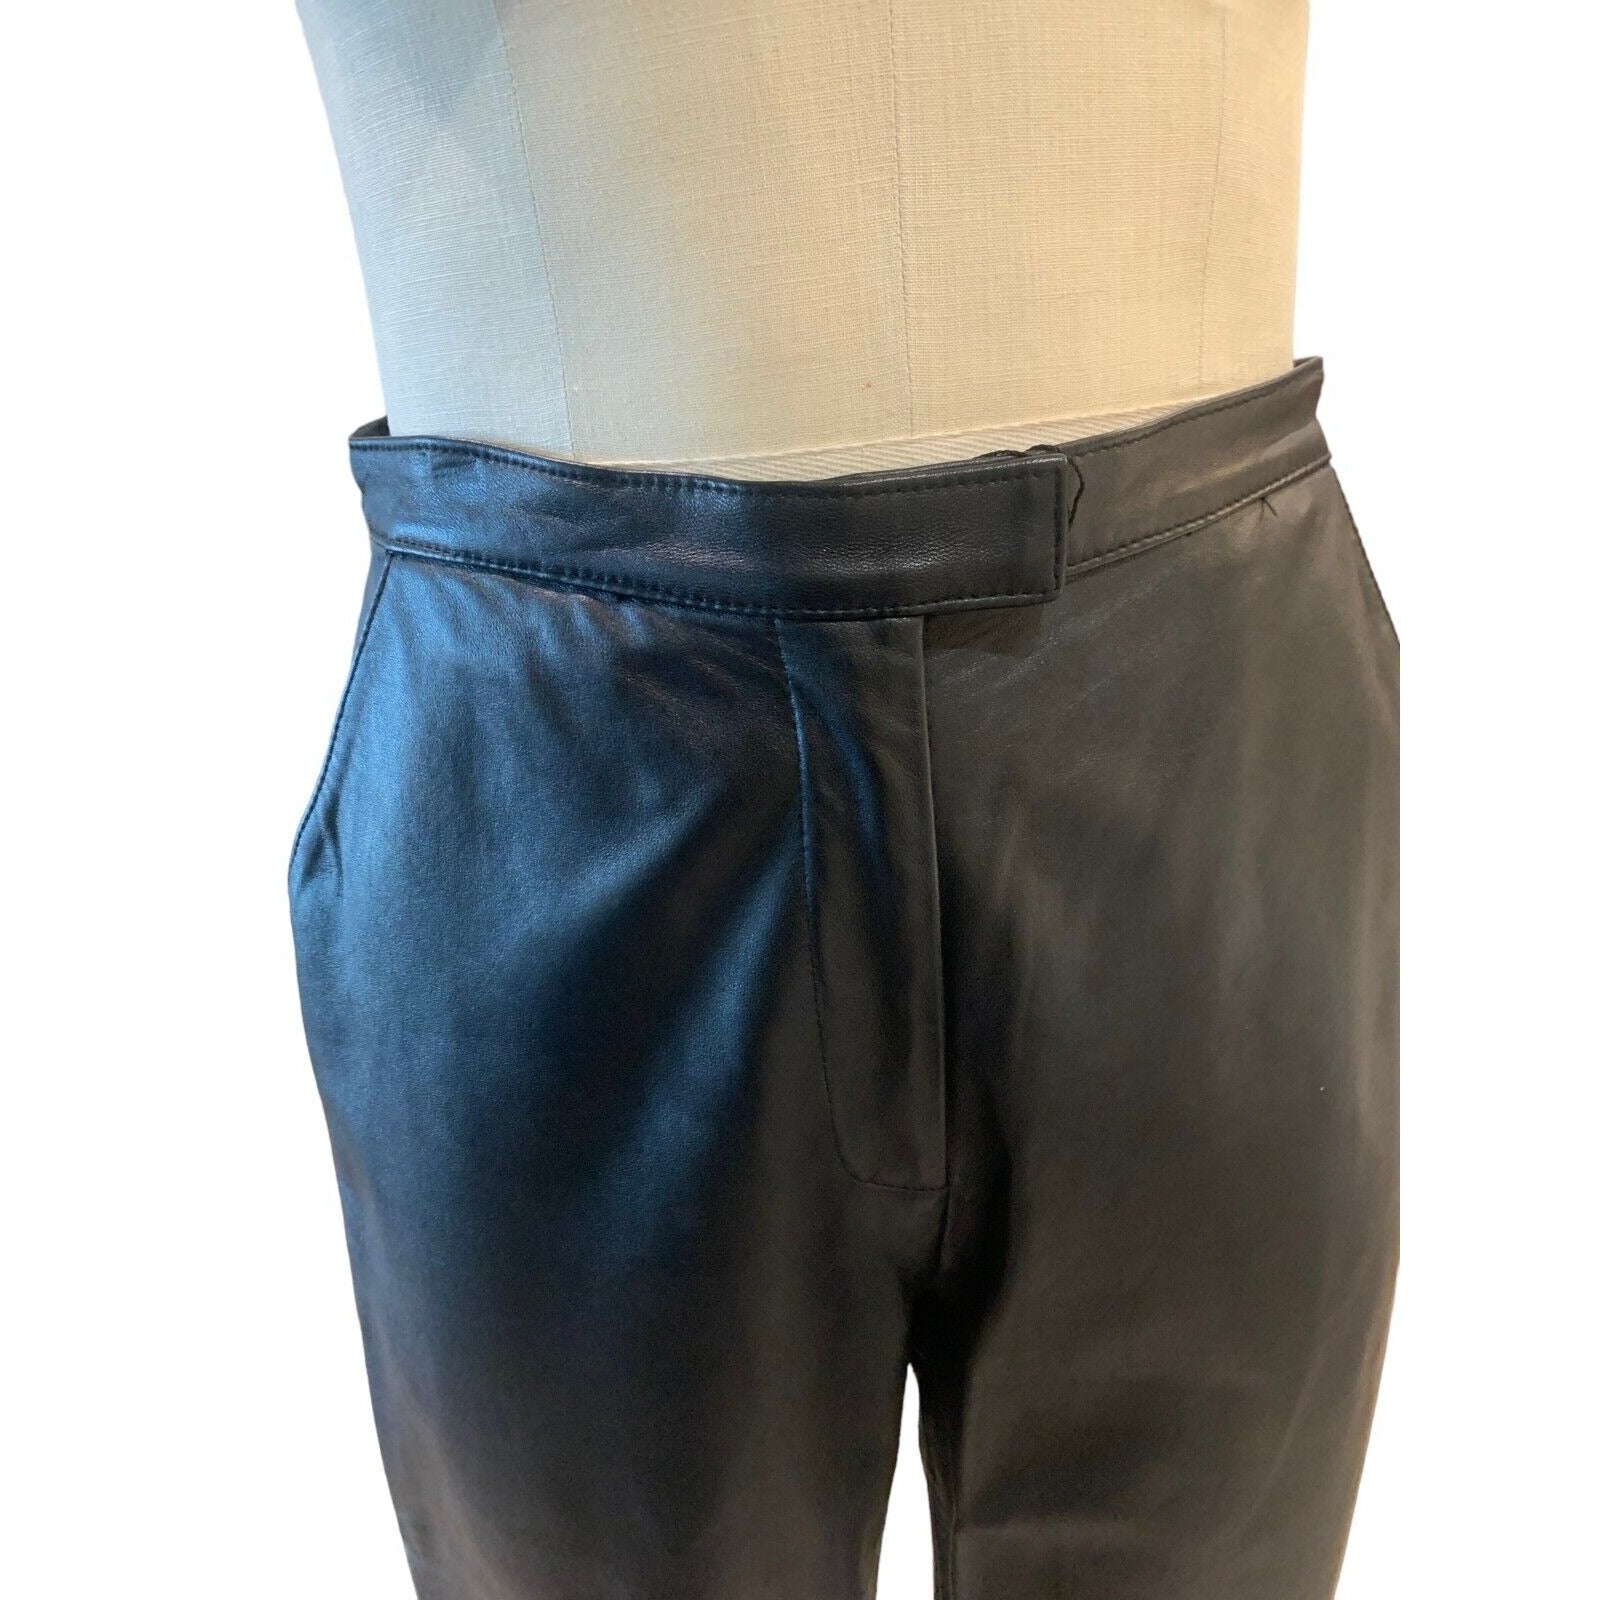 Closeup Of Front Of Women's Leather Pant